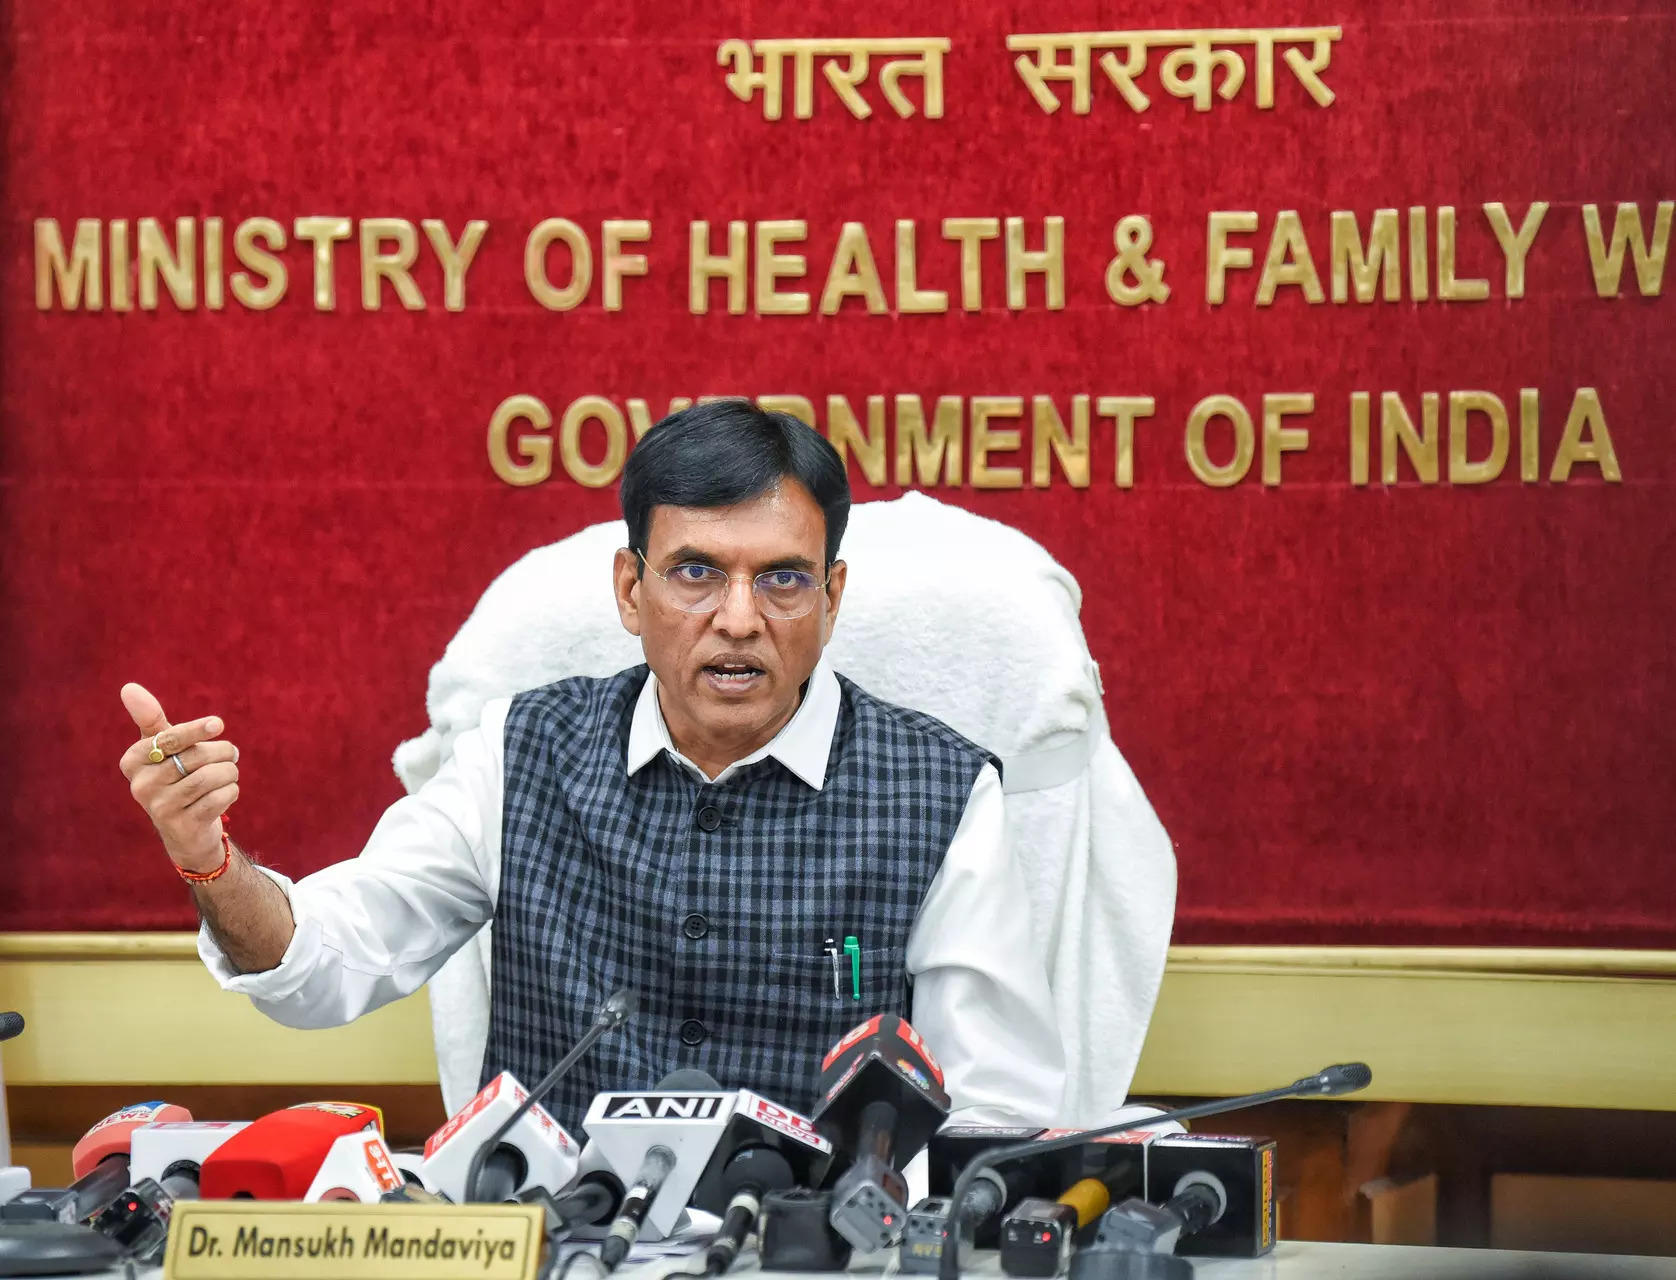 Covid-19: Health ministry asks states to be prepared for mock drills, increase surveillance 